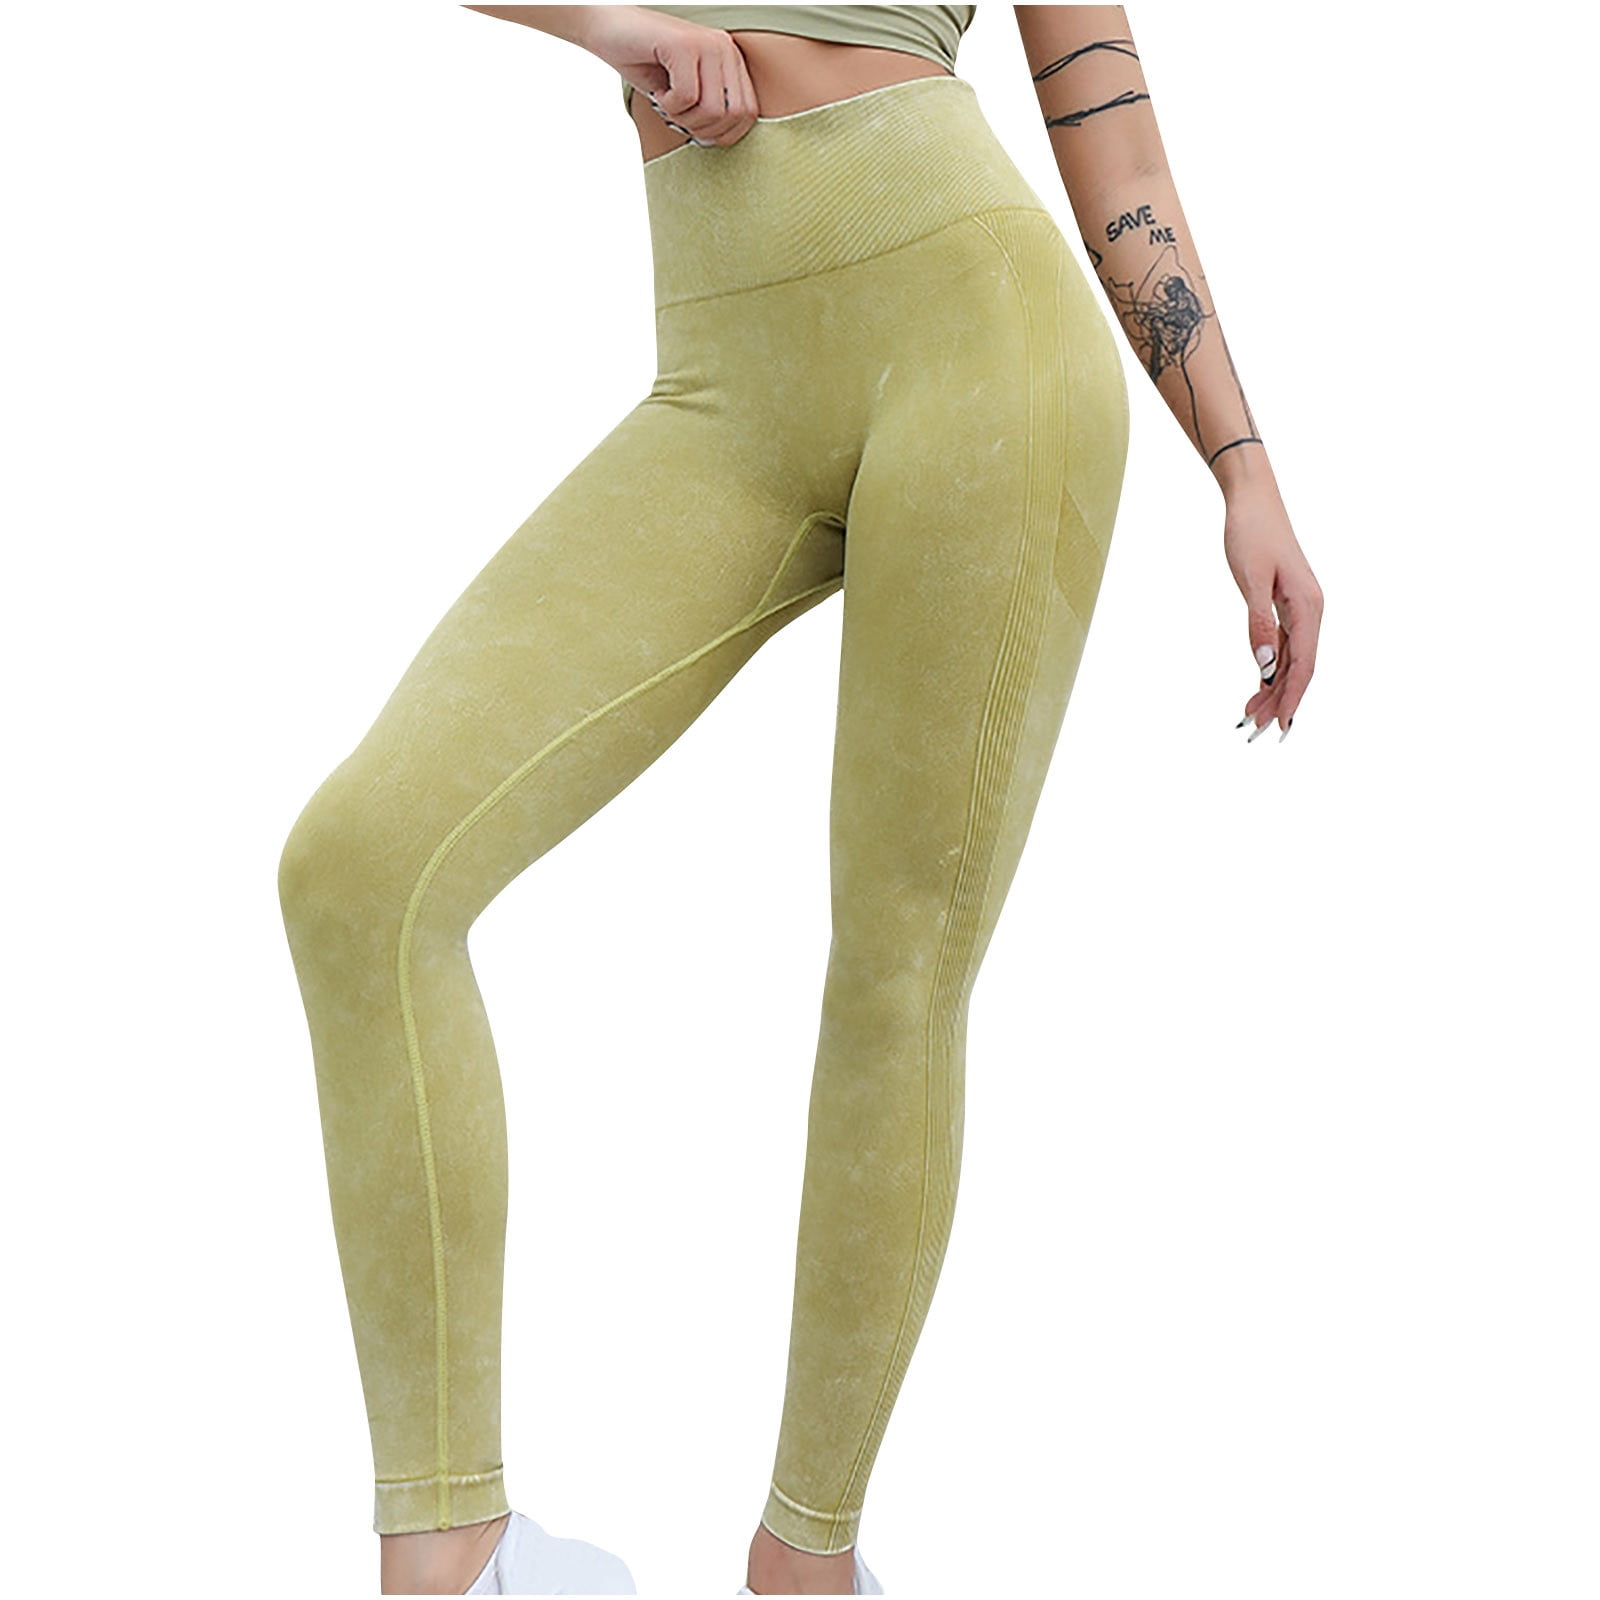 SELONE Compression Leggings for Women Workout Butt Lifting Gym Jumpsuits  Long Length Seamless High Waist Sports Yogalicious Utility Dressy Everyday